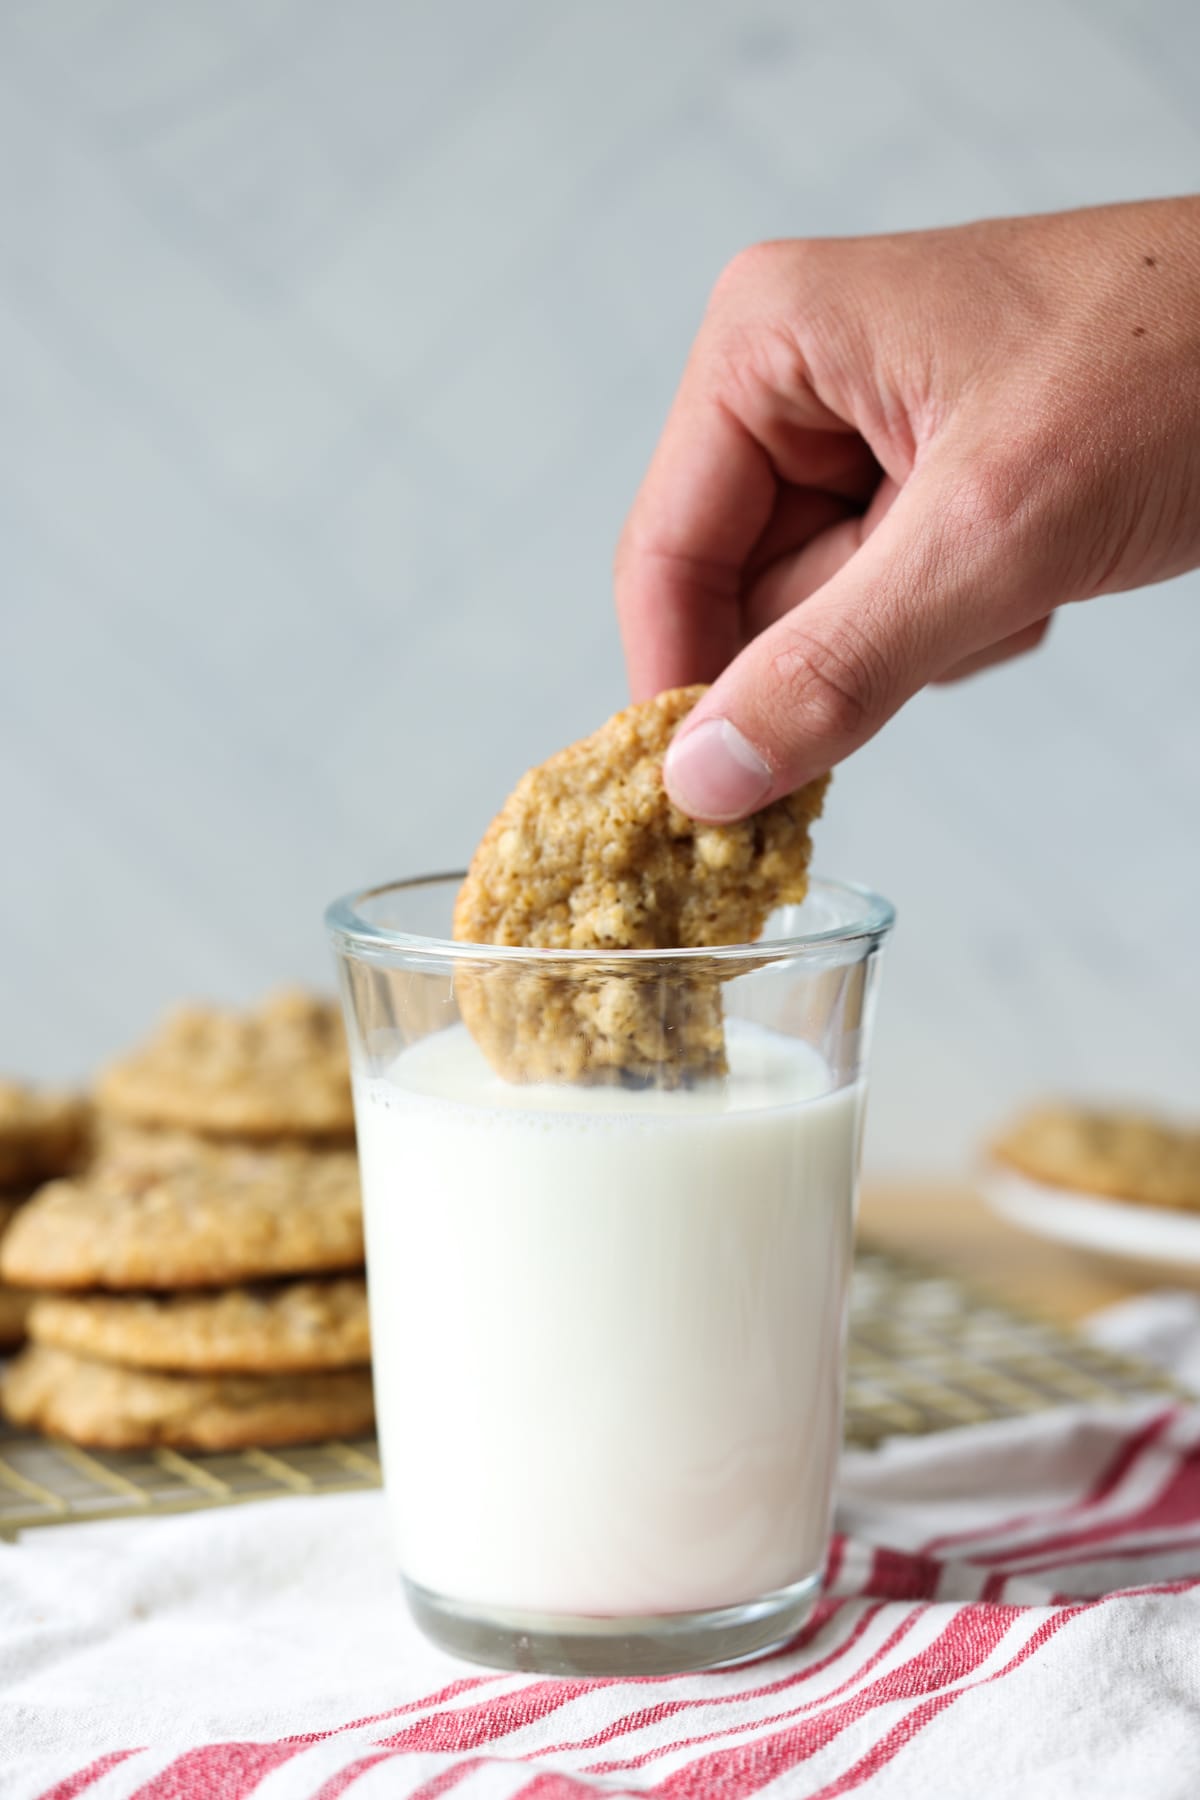 A hand dunking half a pecan cookie in a clear glass of milk